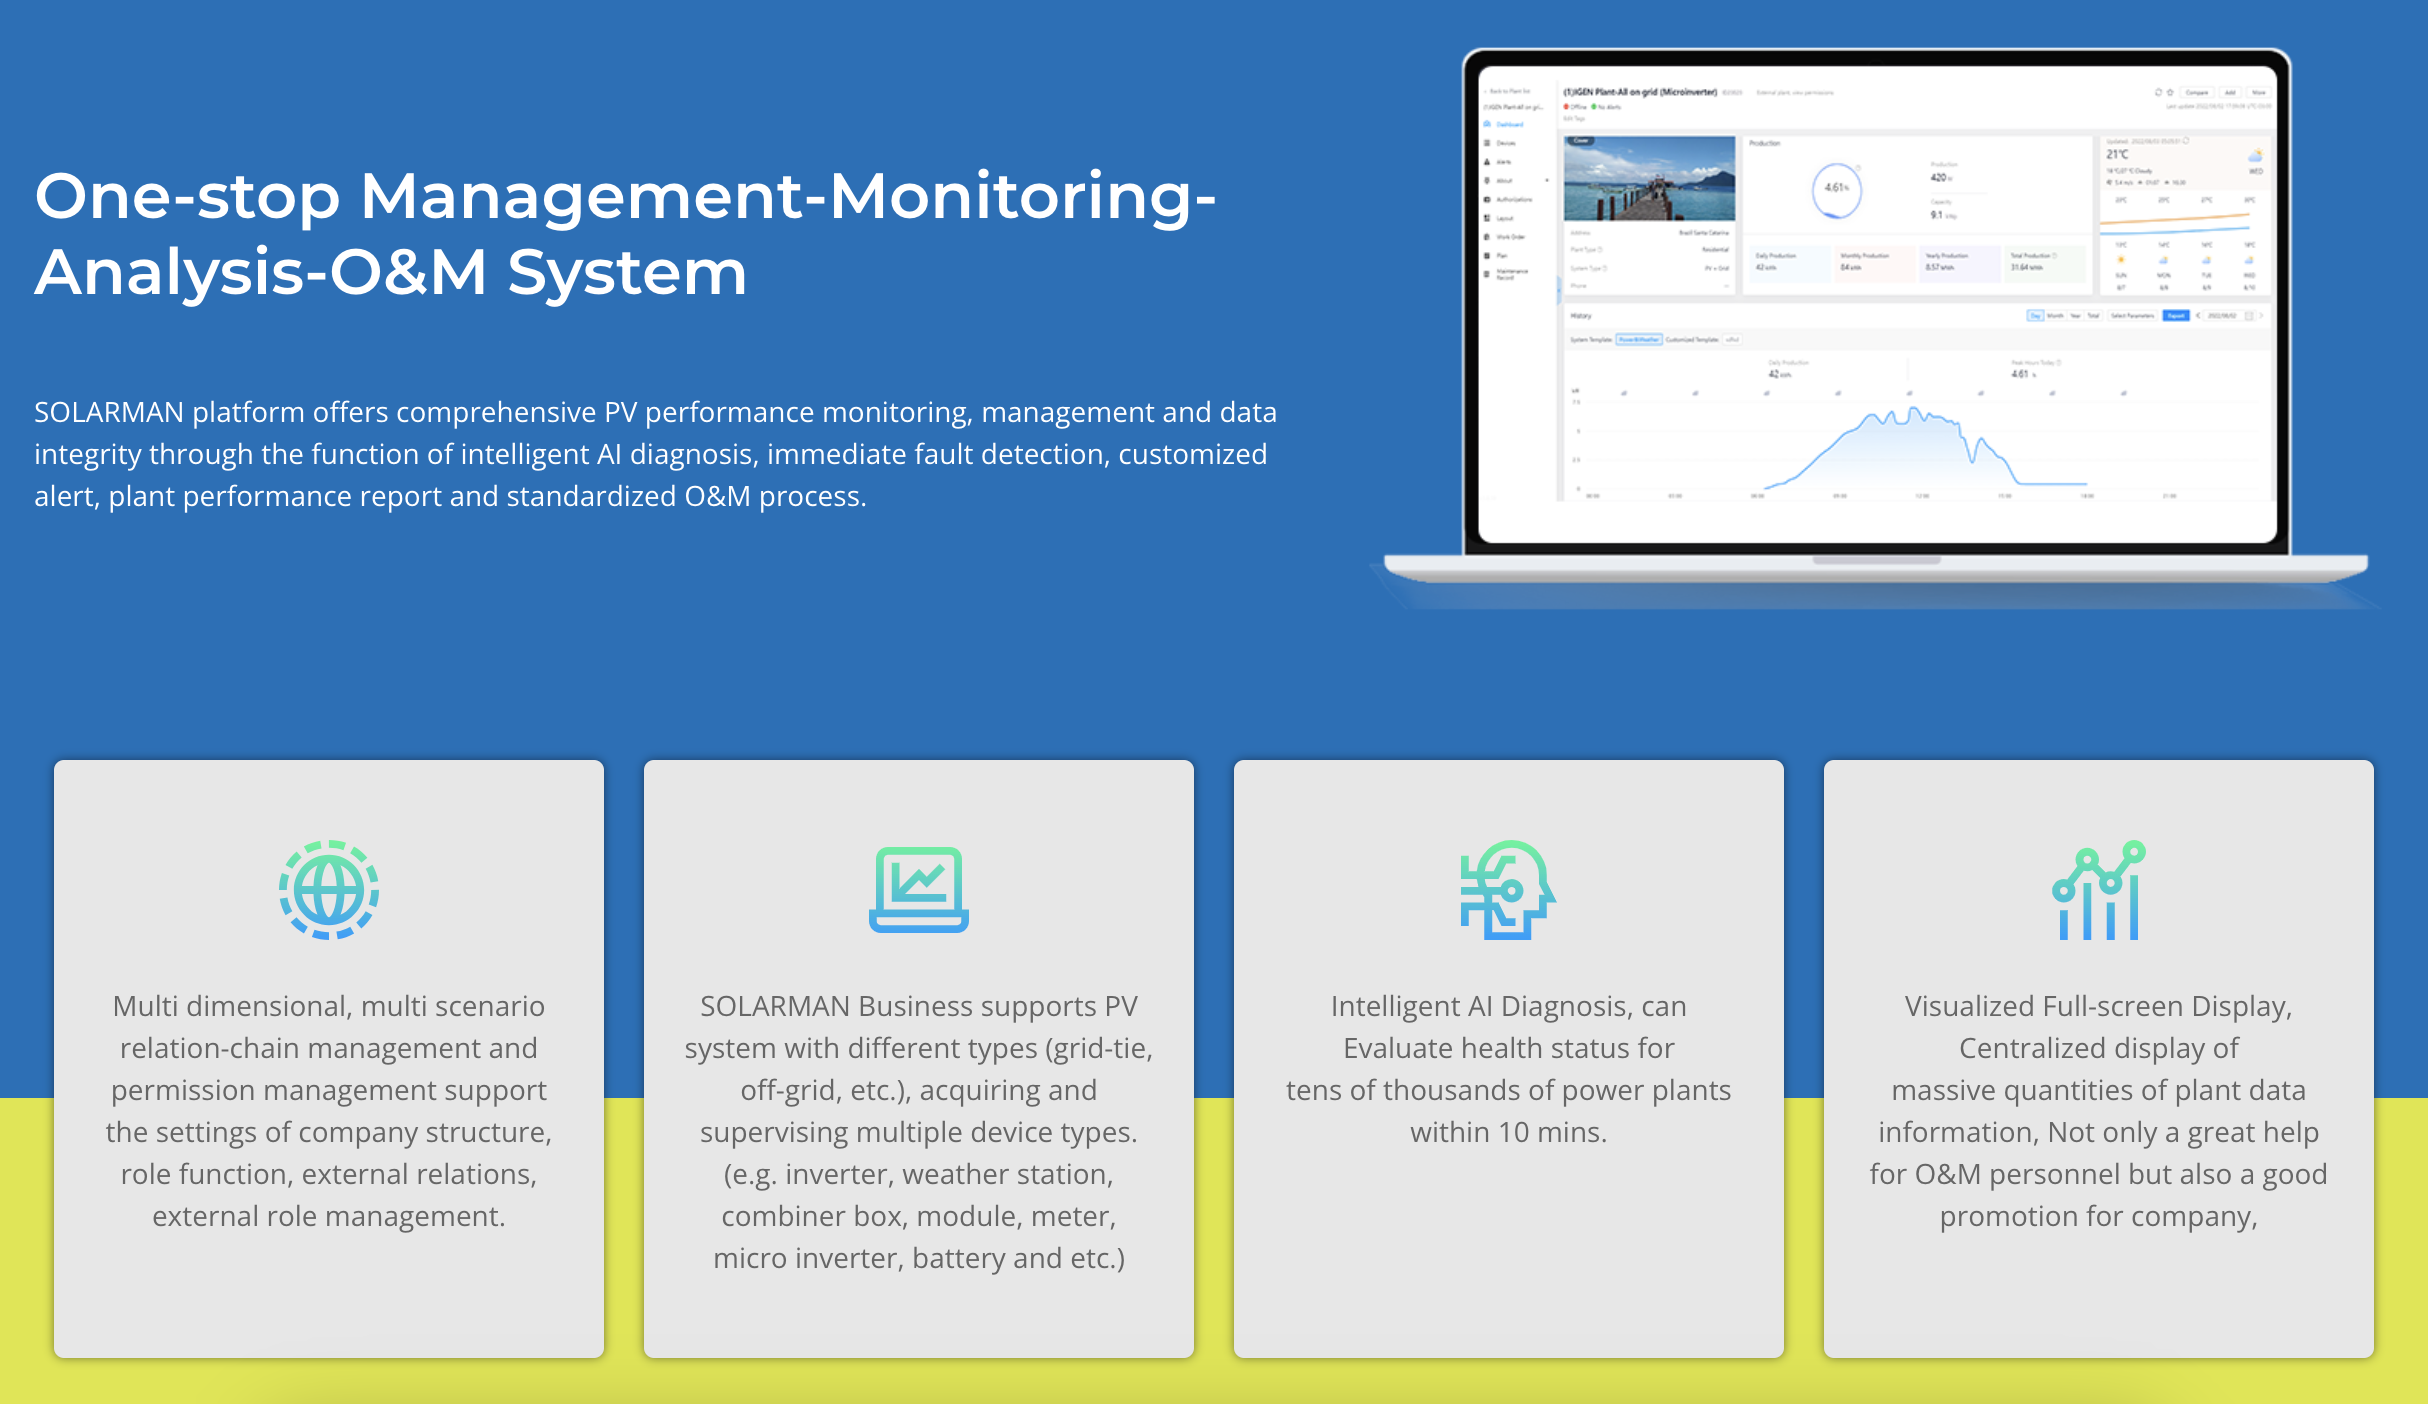 One-stop Management-Monitoring-Analysis O&M System